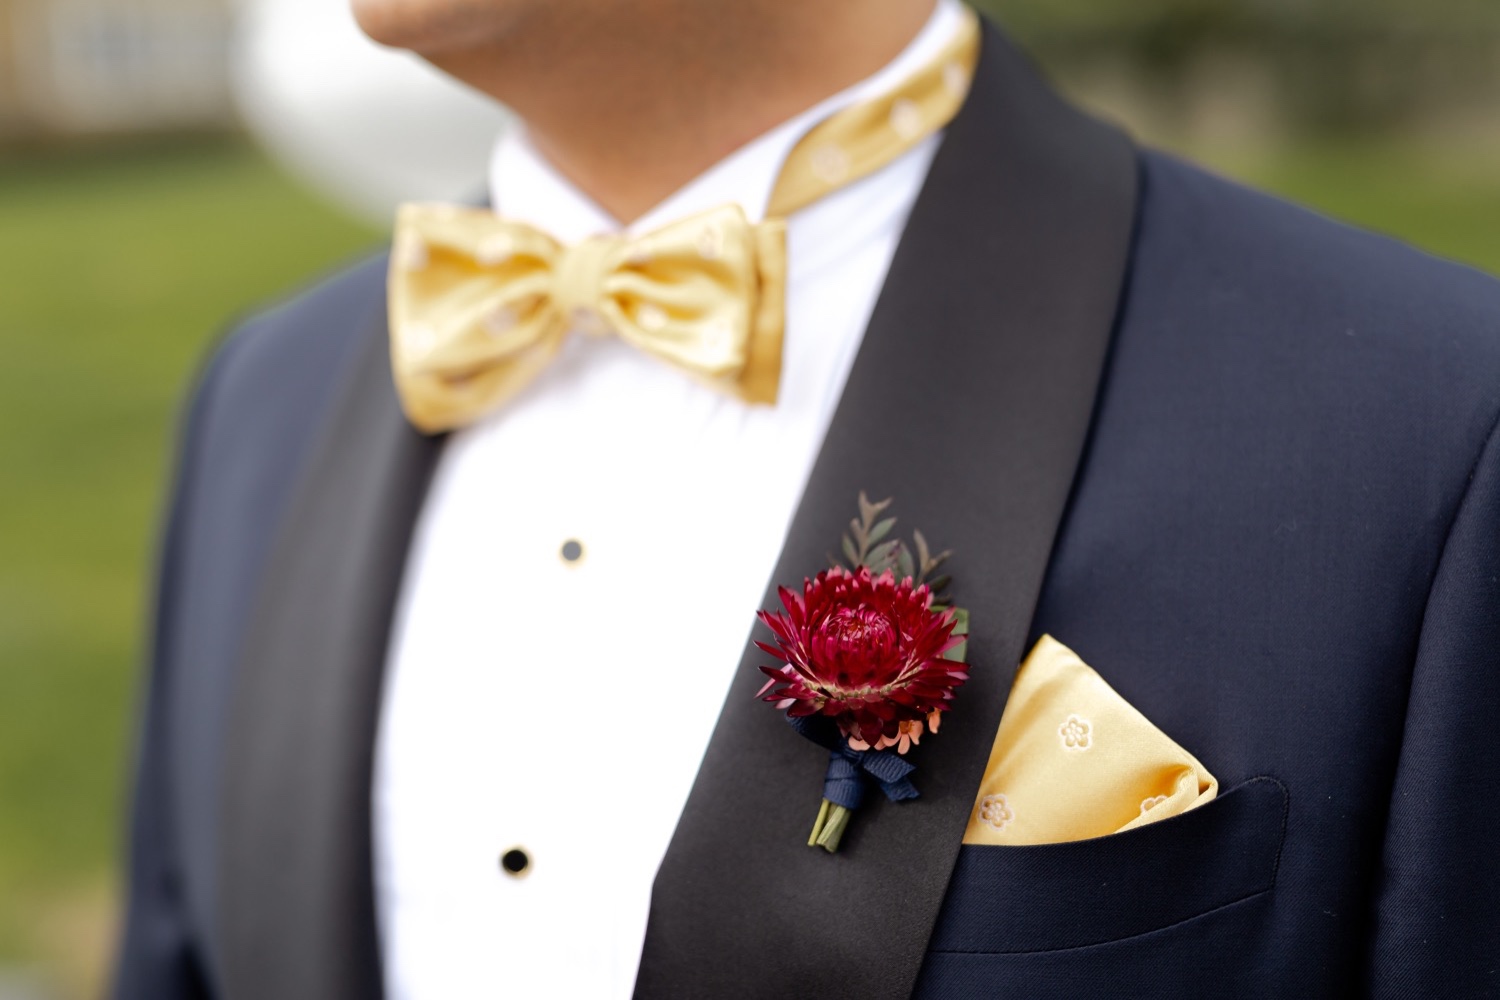 A groom's boutonniere.